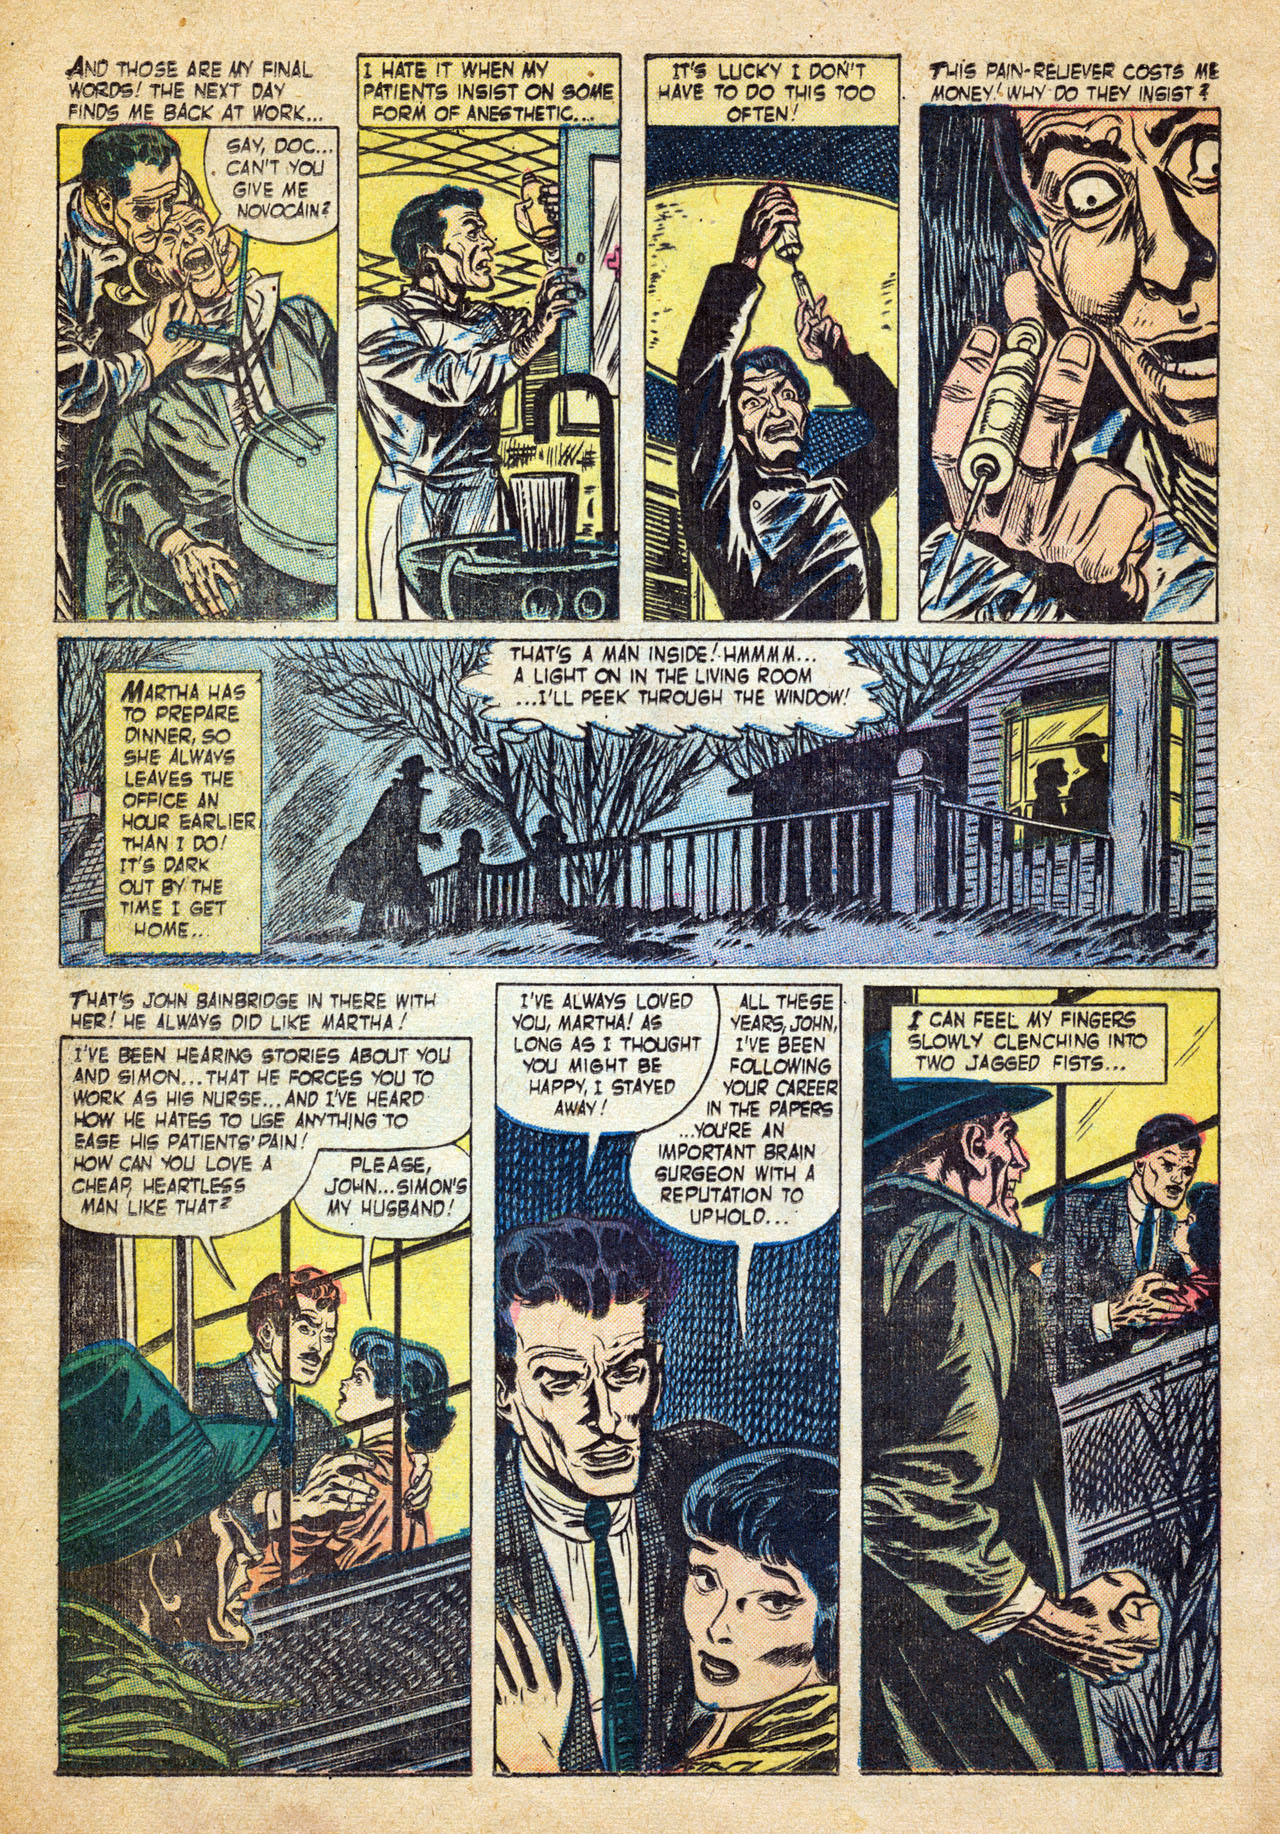 Marvel Tales (1949) 117 Page 11